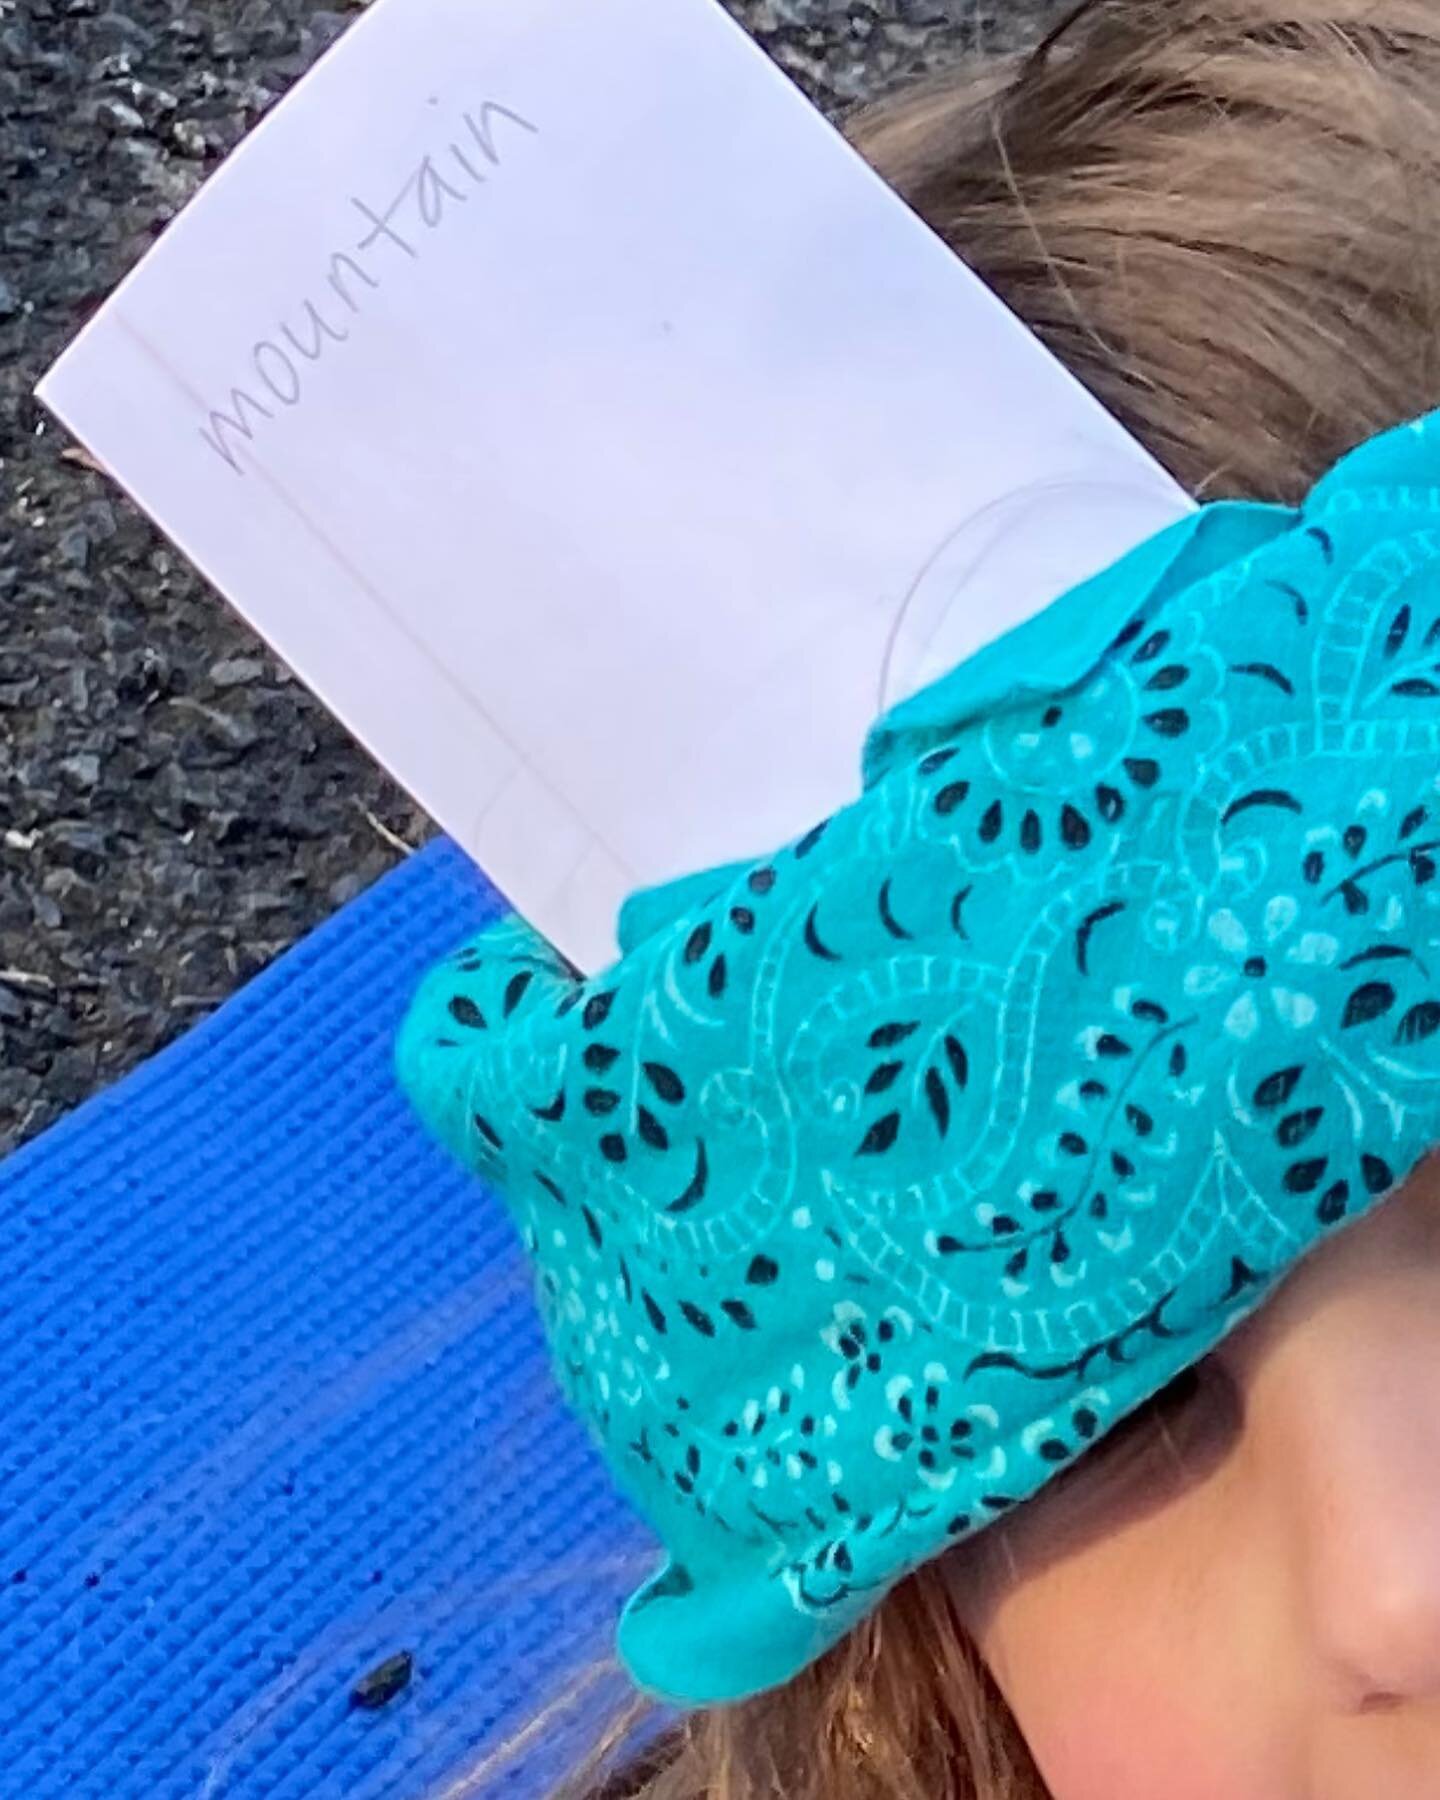 You know that game Headbandz? I created a homemade yoga-fied version of it. Use a bandana or stretchy headband. Grab some index cards and write the name of a yoga pose on each card. Slip one card under headband of other player so she can&rsquo;t see 